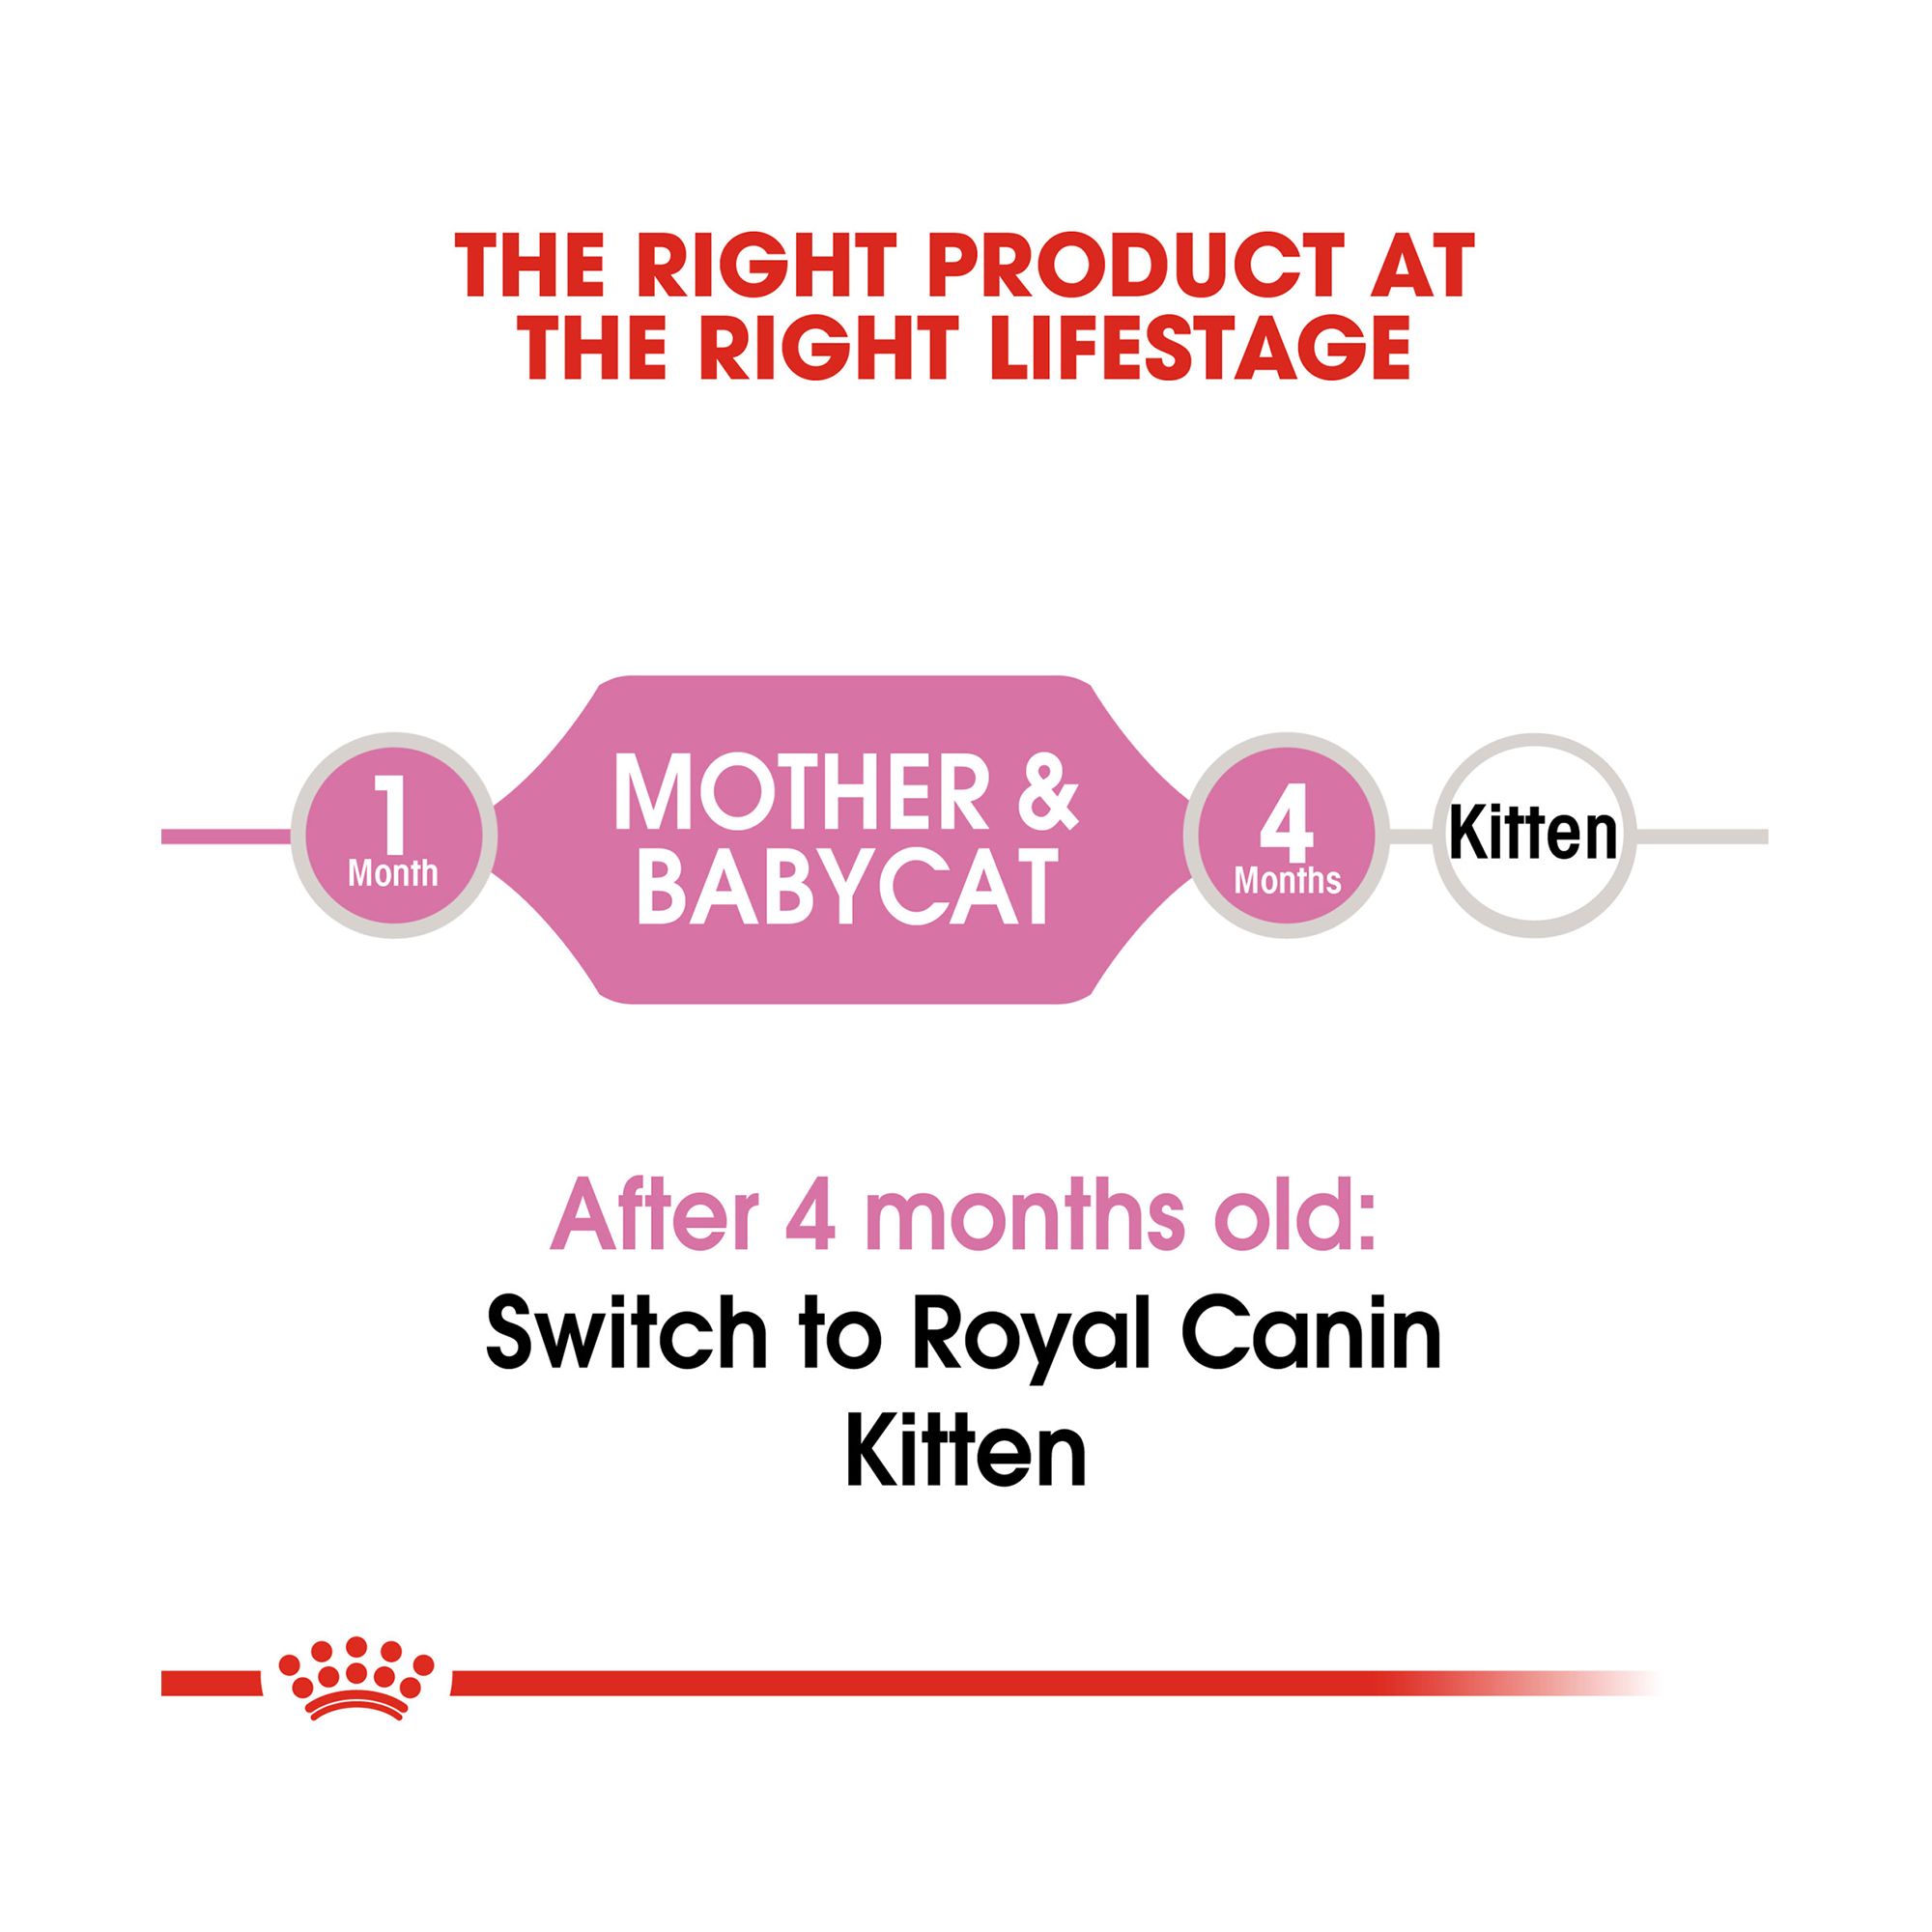 royal canin mother and baby dry cat food